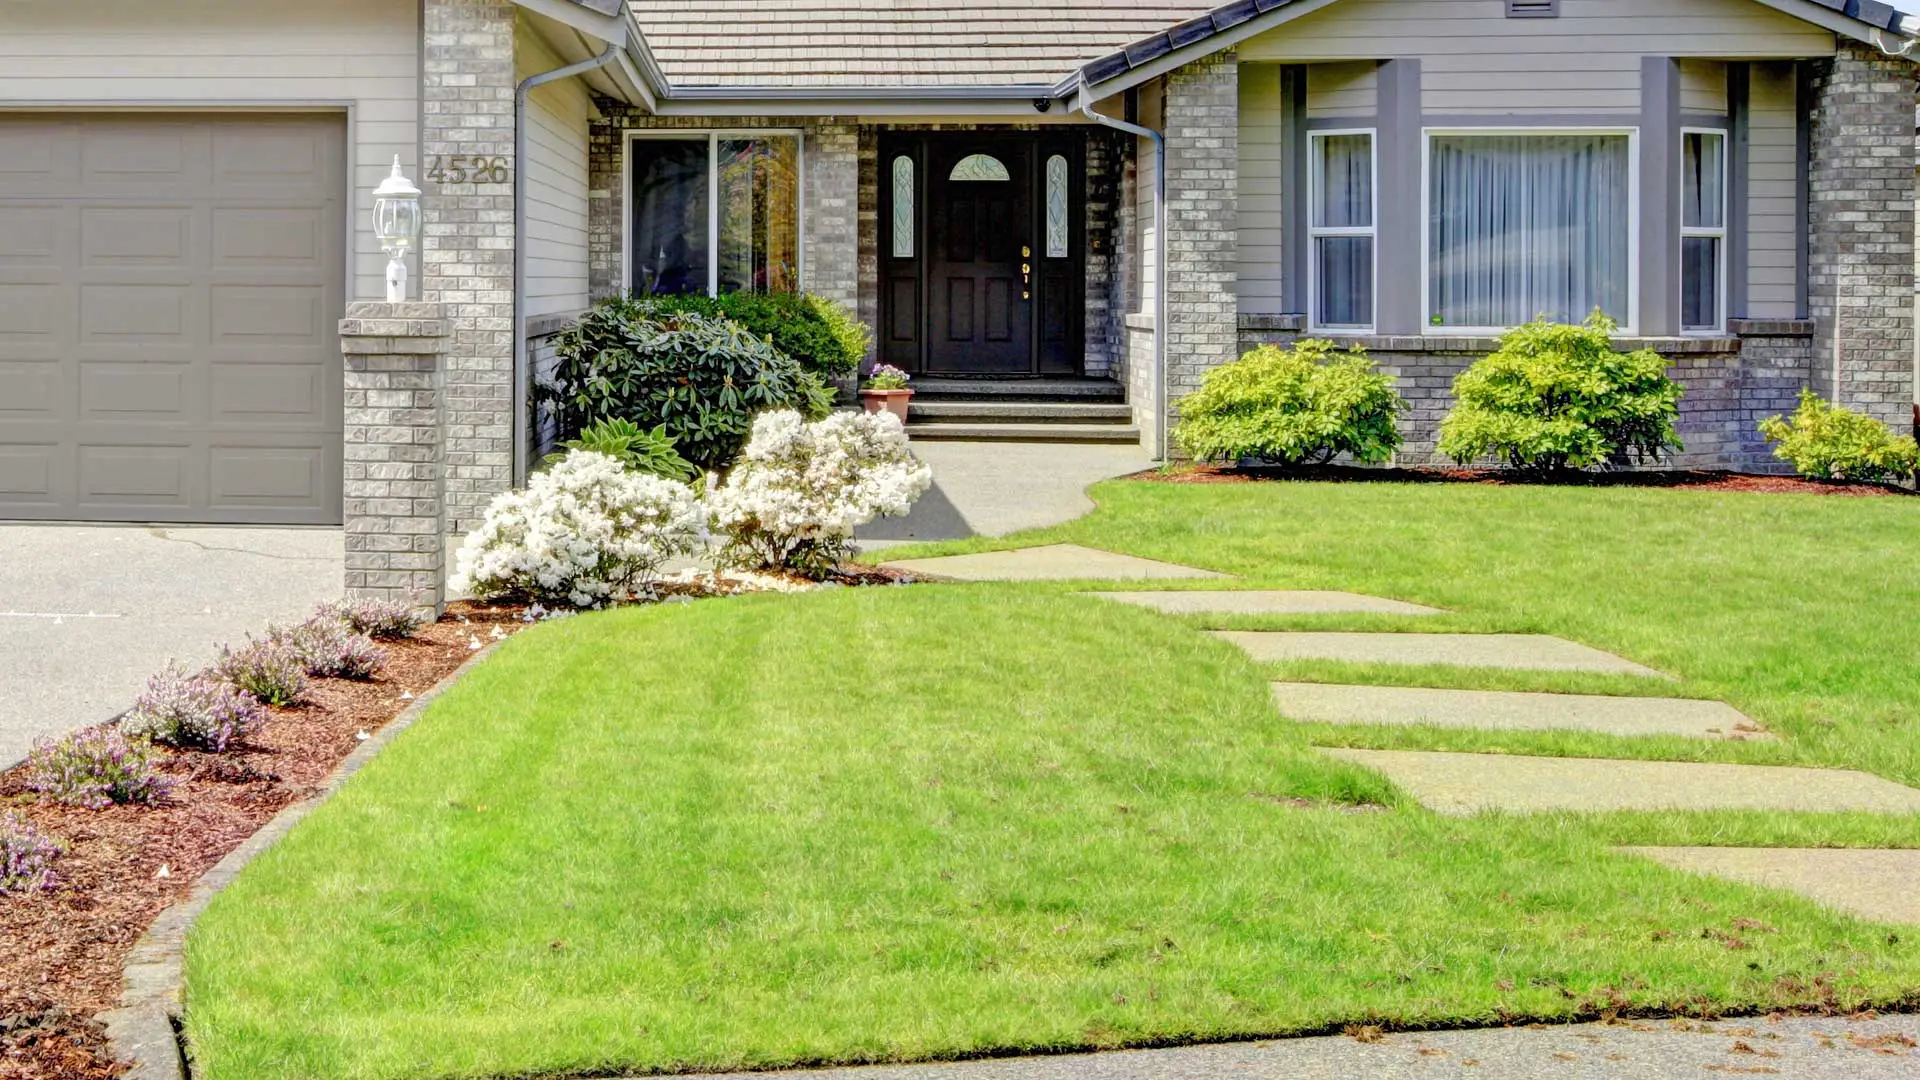 Mowed lawn and maintained landscaping by J&C Lawn Care.